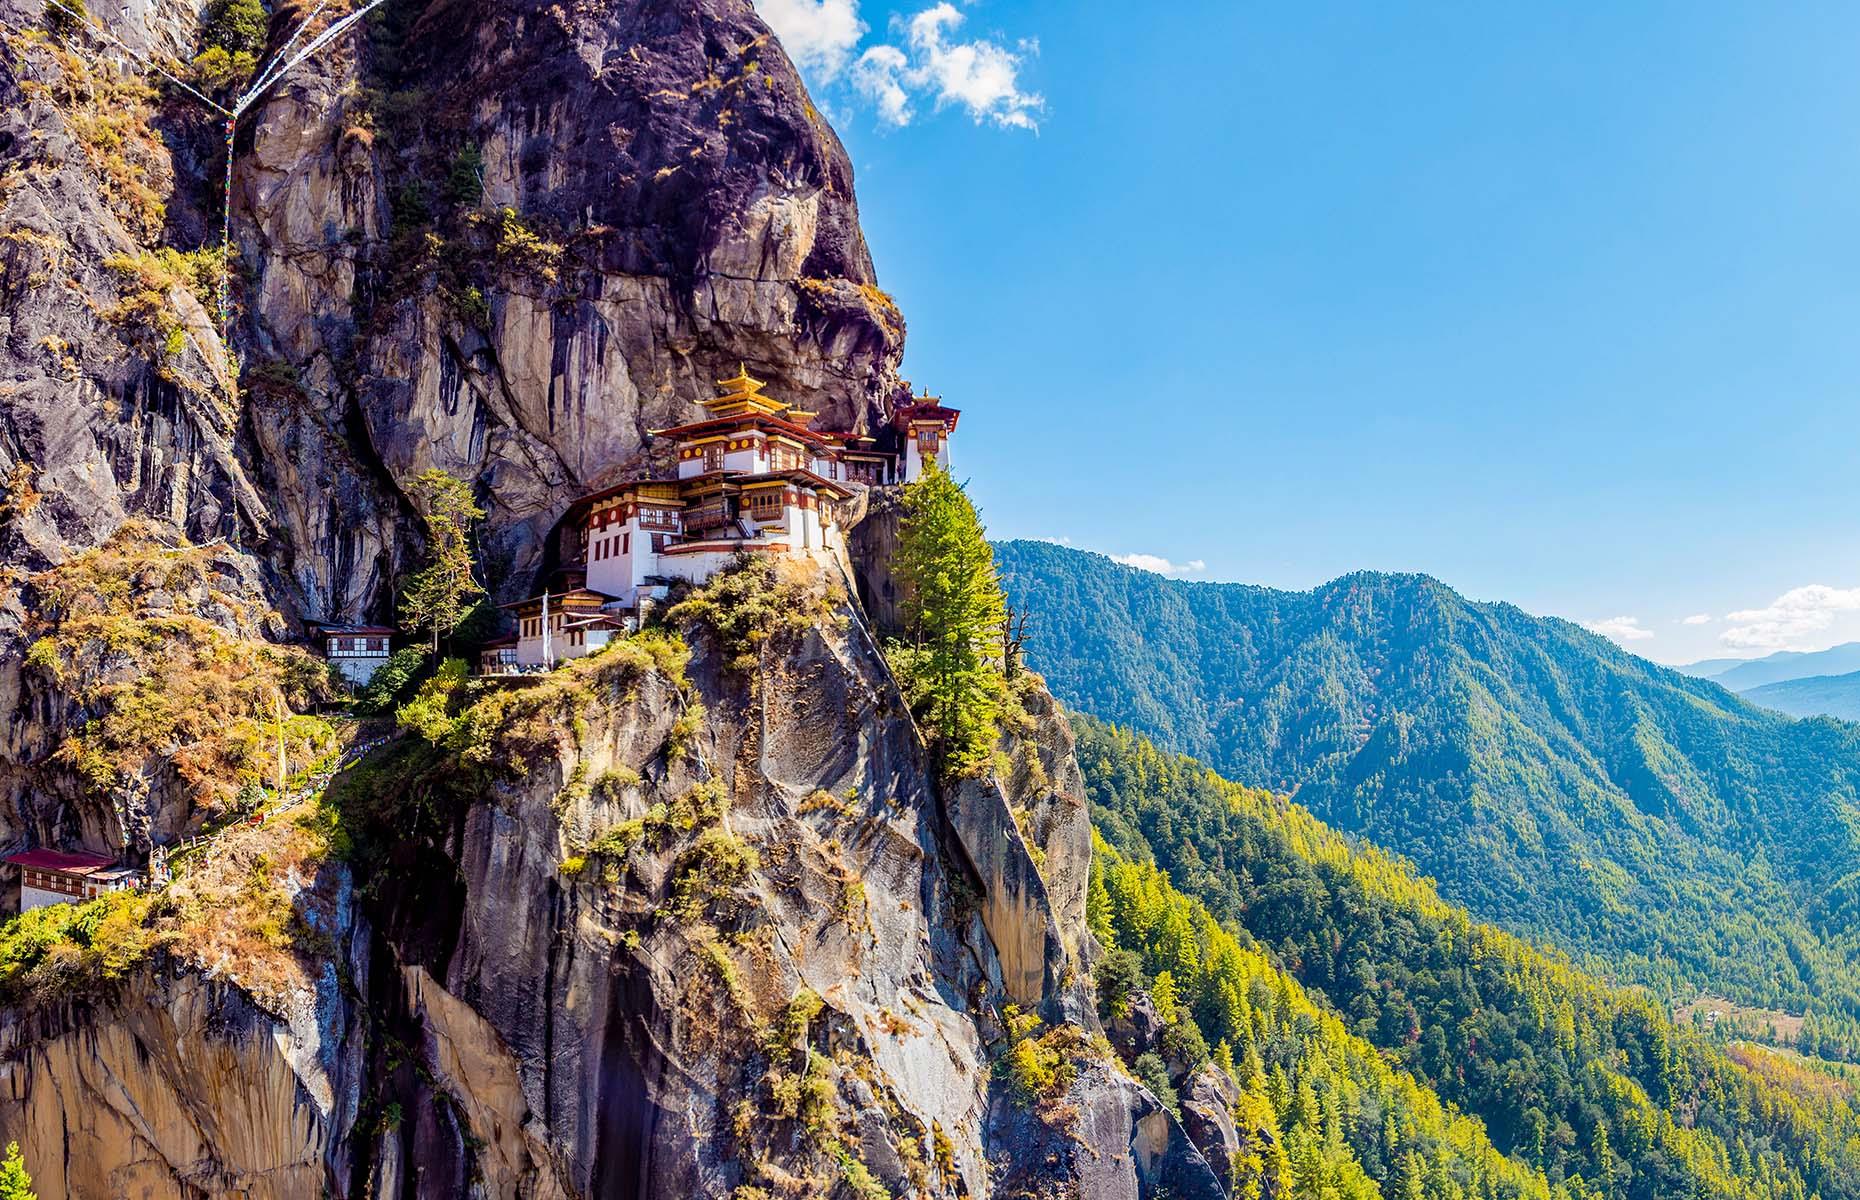 One of the world’s most precariously-placed monasteries, Paro Taktsang (better known as the Tiger’s Nest) perches tentatively on a cliffside in the upper Paro valley in Bhutan. The elegant structure is built around a cave in the cliff face that is said to have been used by Guru Padmasambhava for meditation in the 8th century. Legend has it he flew to the cave on the back of a tigress from Khenpajong.